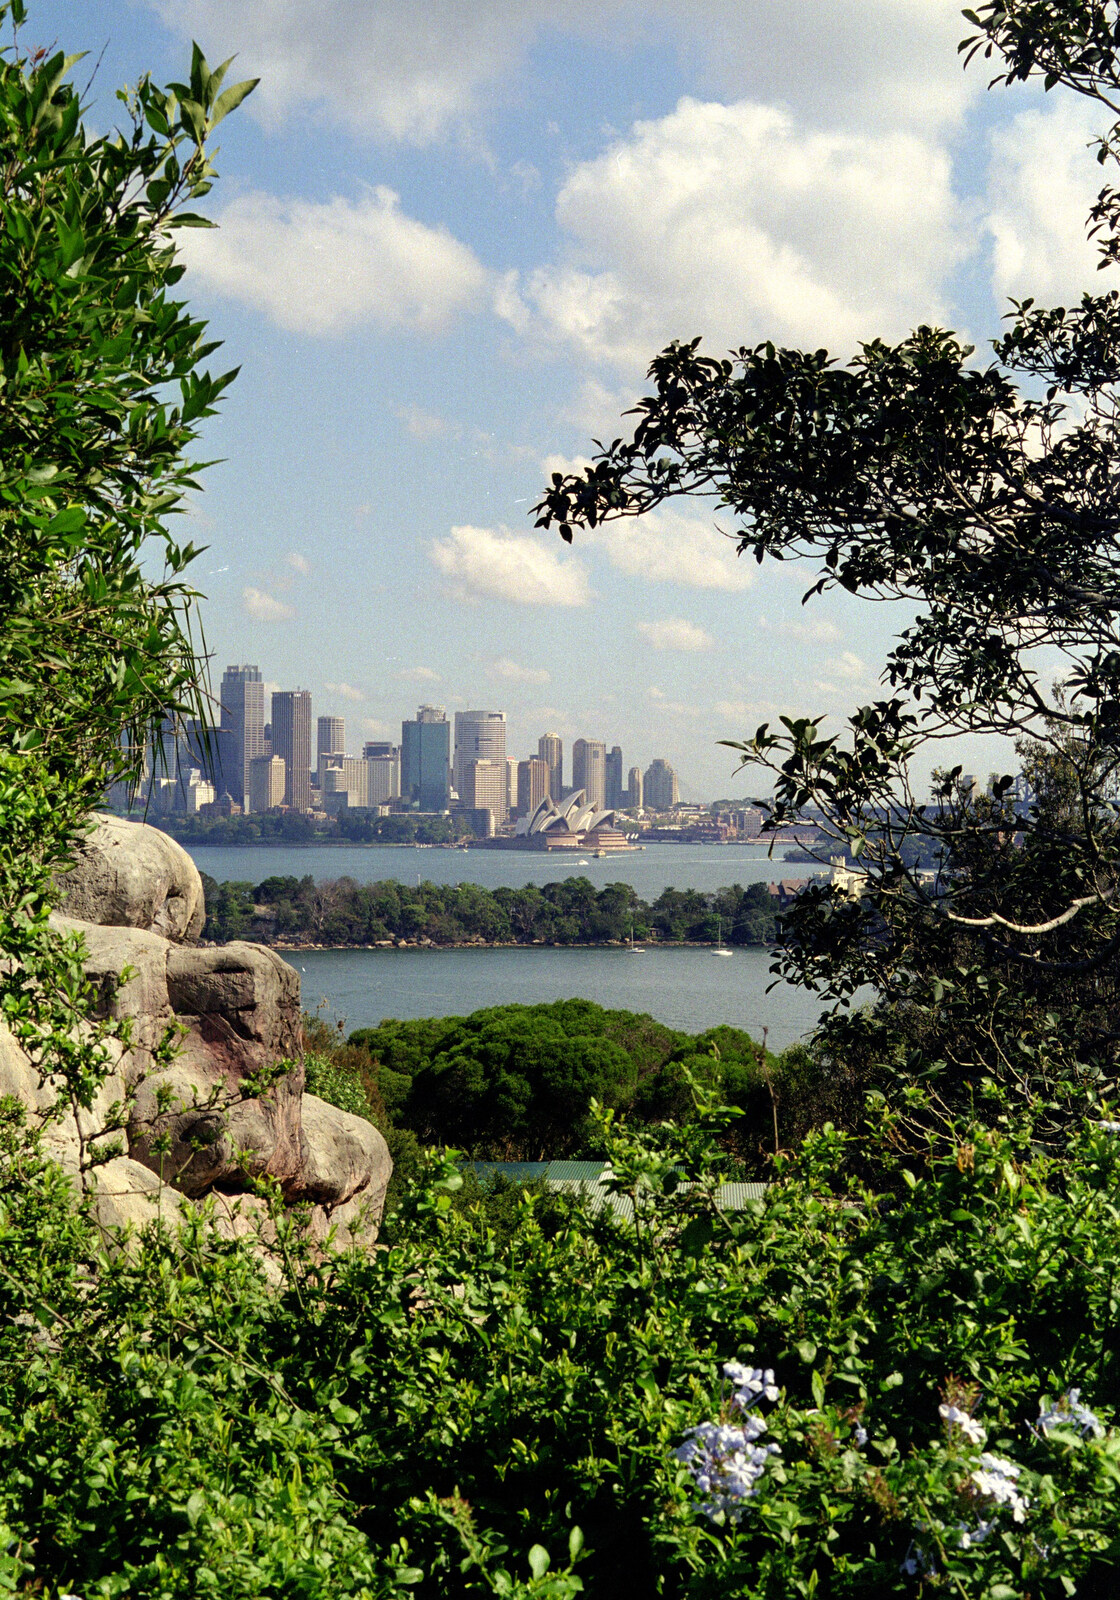 A tree-framed view of the city from A Trip to the Zoo, Sydney, Australia - 7th April 2000